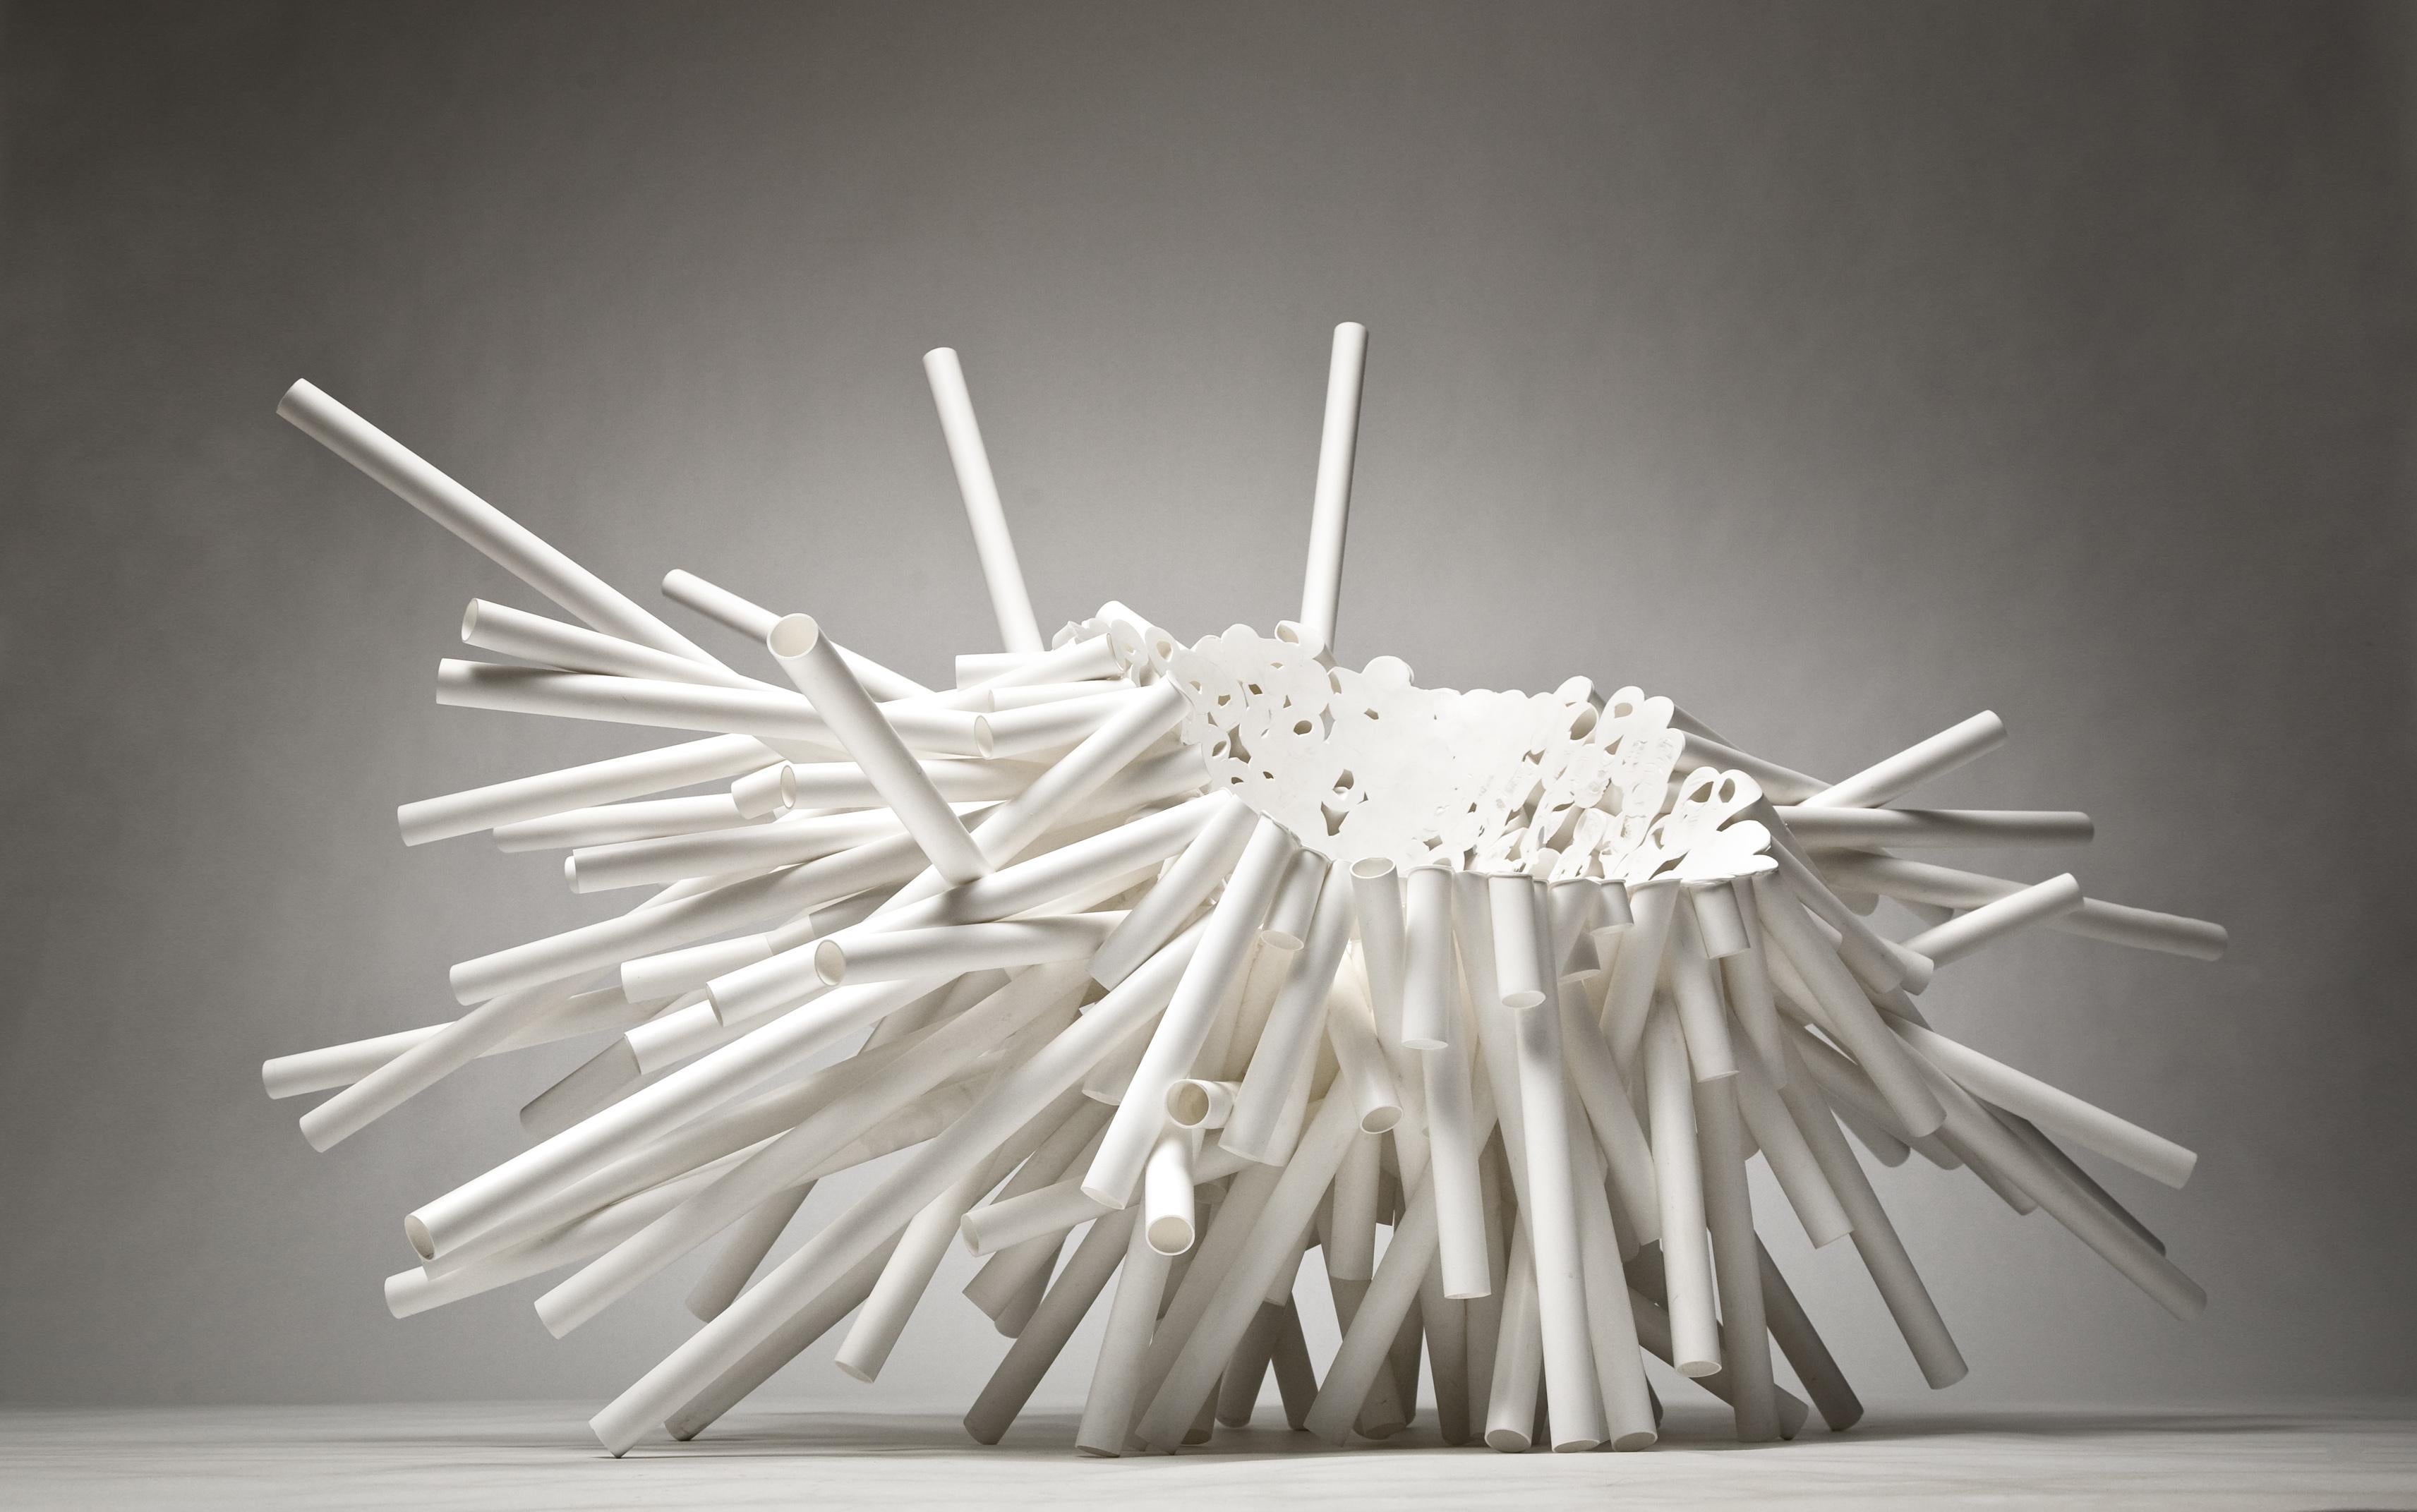 English Meltdown Chair, PP Tube #1 White by Tom Price, Contemporary, Limited Edition For Sale